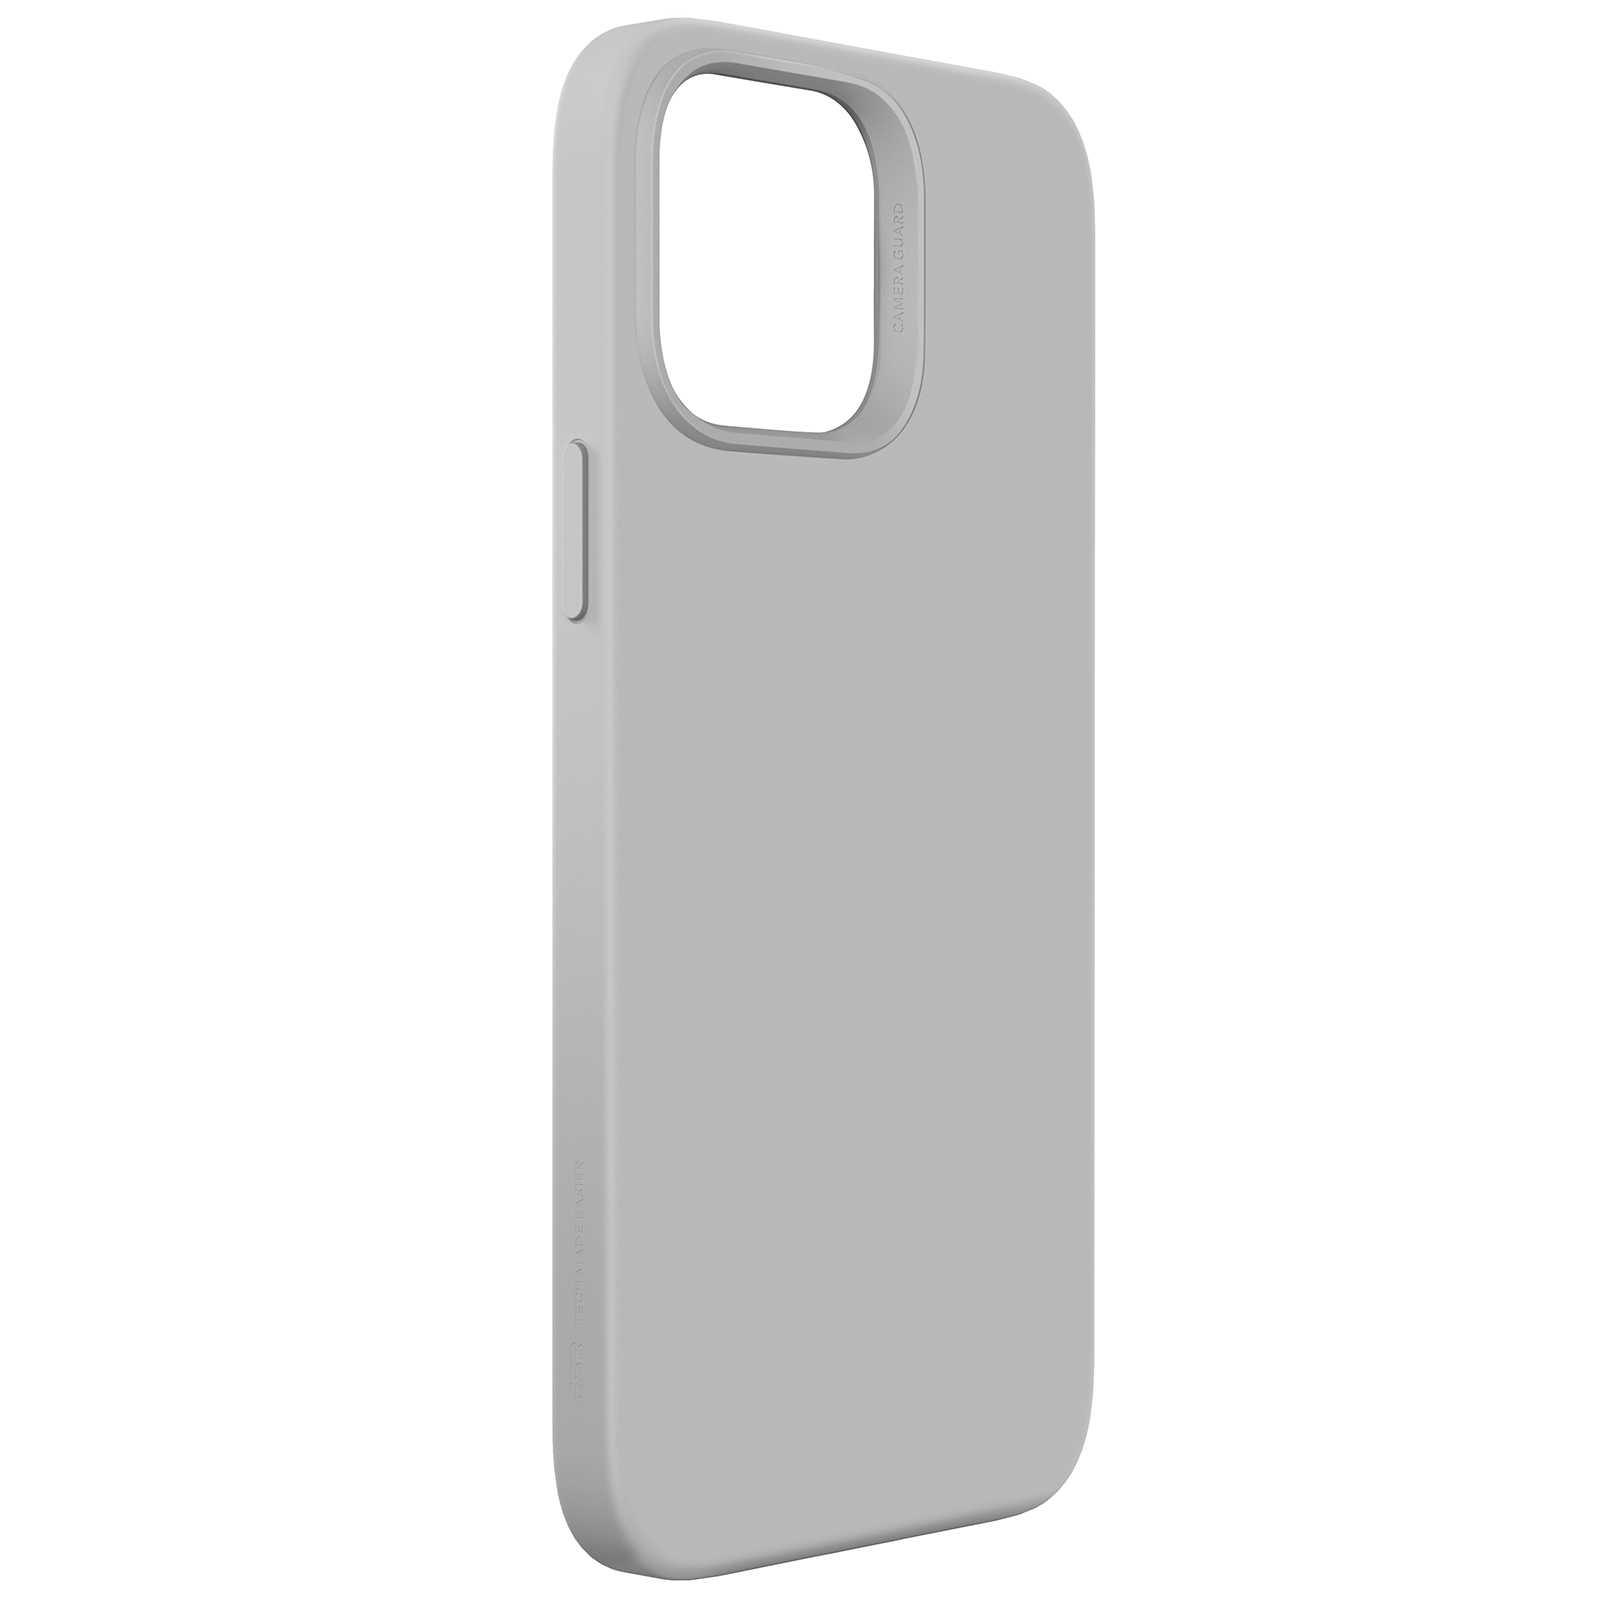 Apple Funda Silicone Case Gris para Iphone 7 Stone MMWR2ZM/A